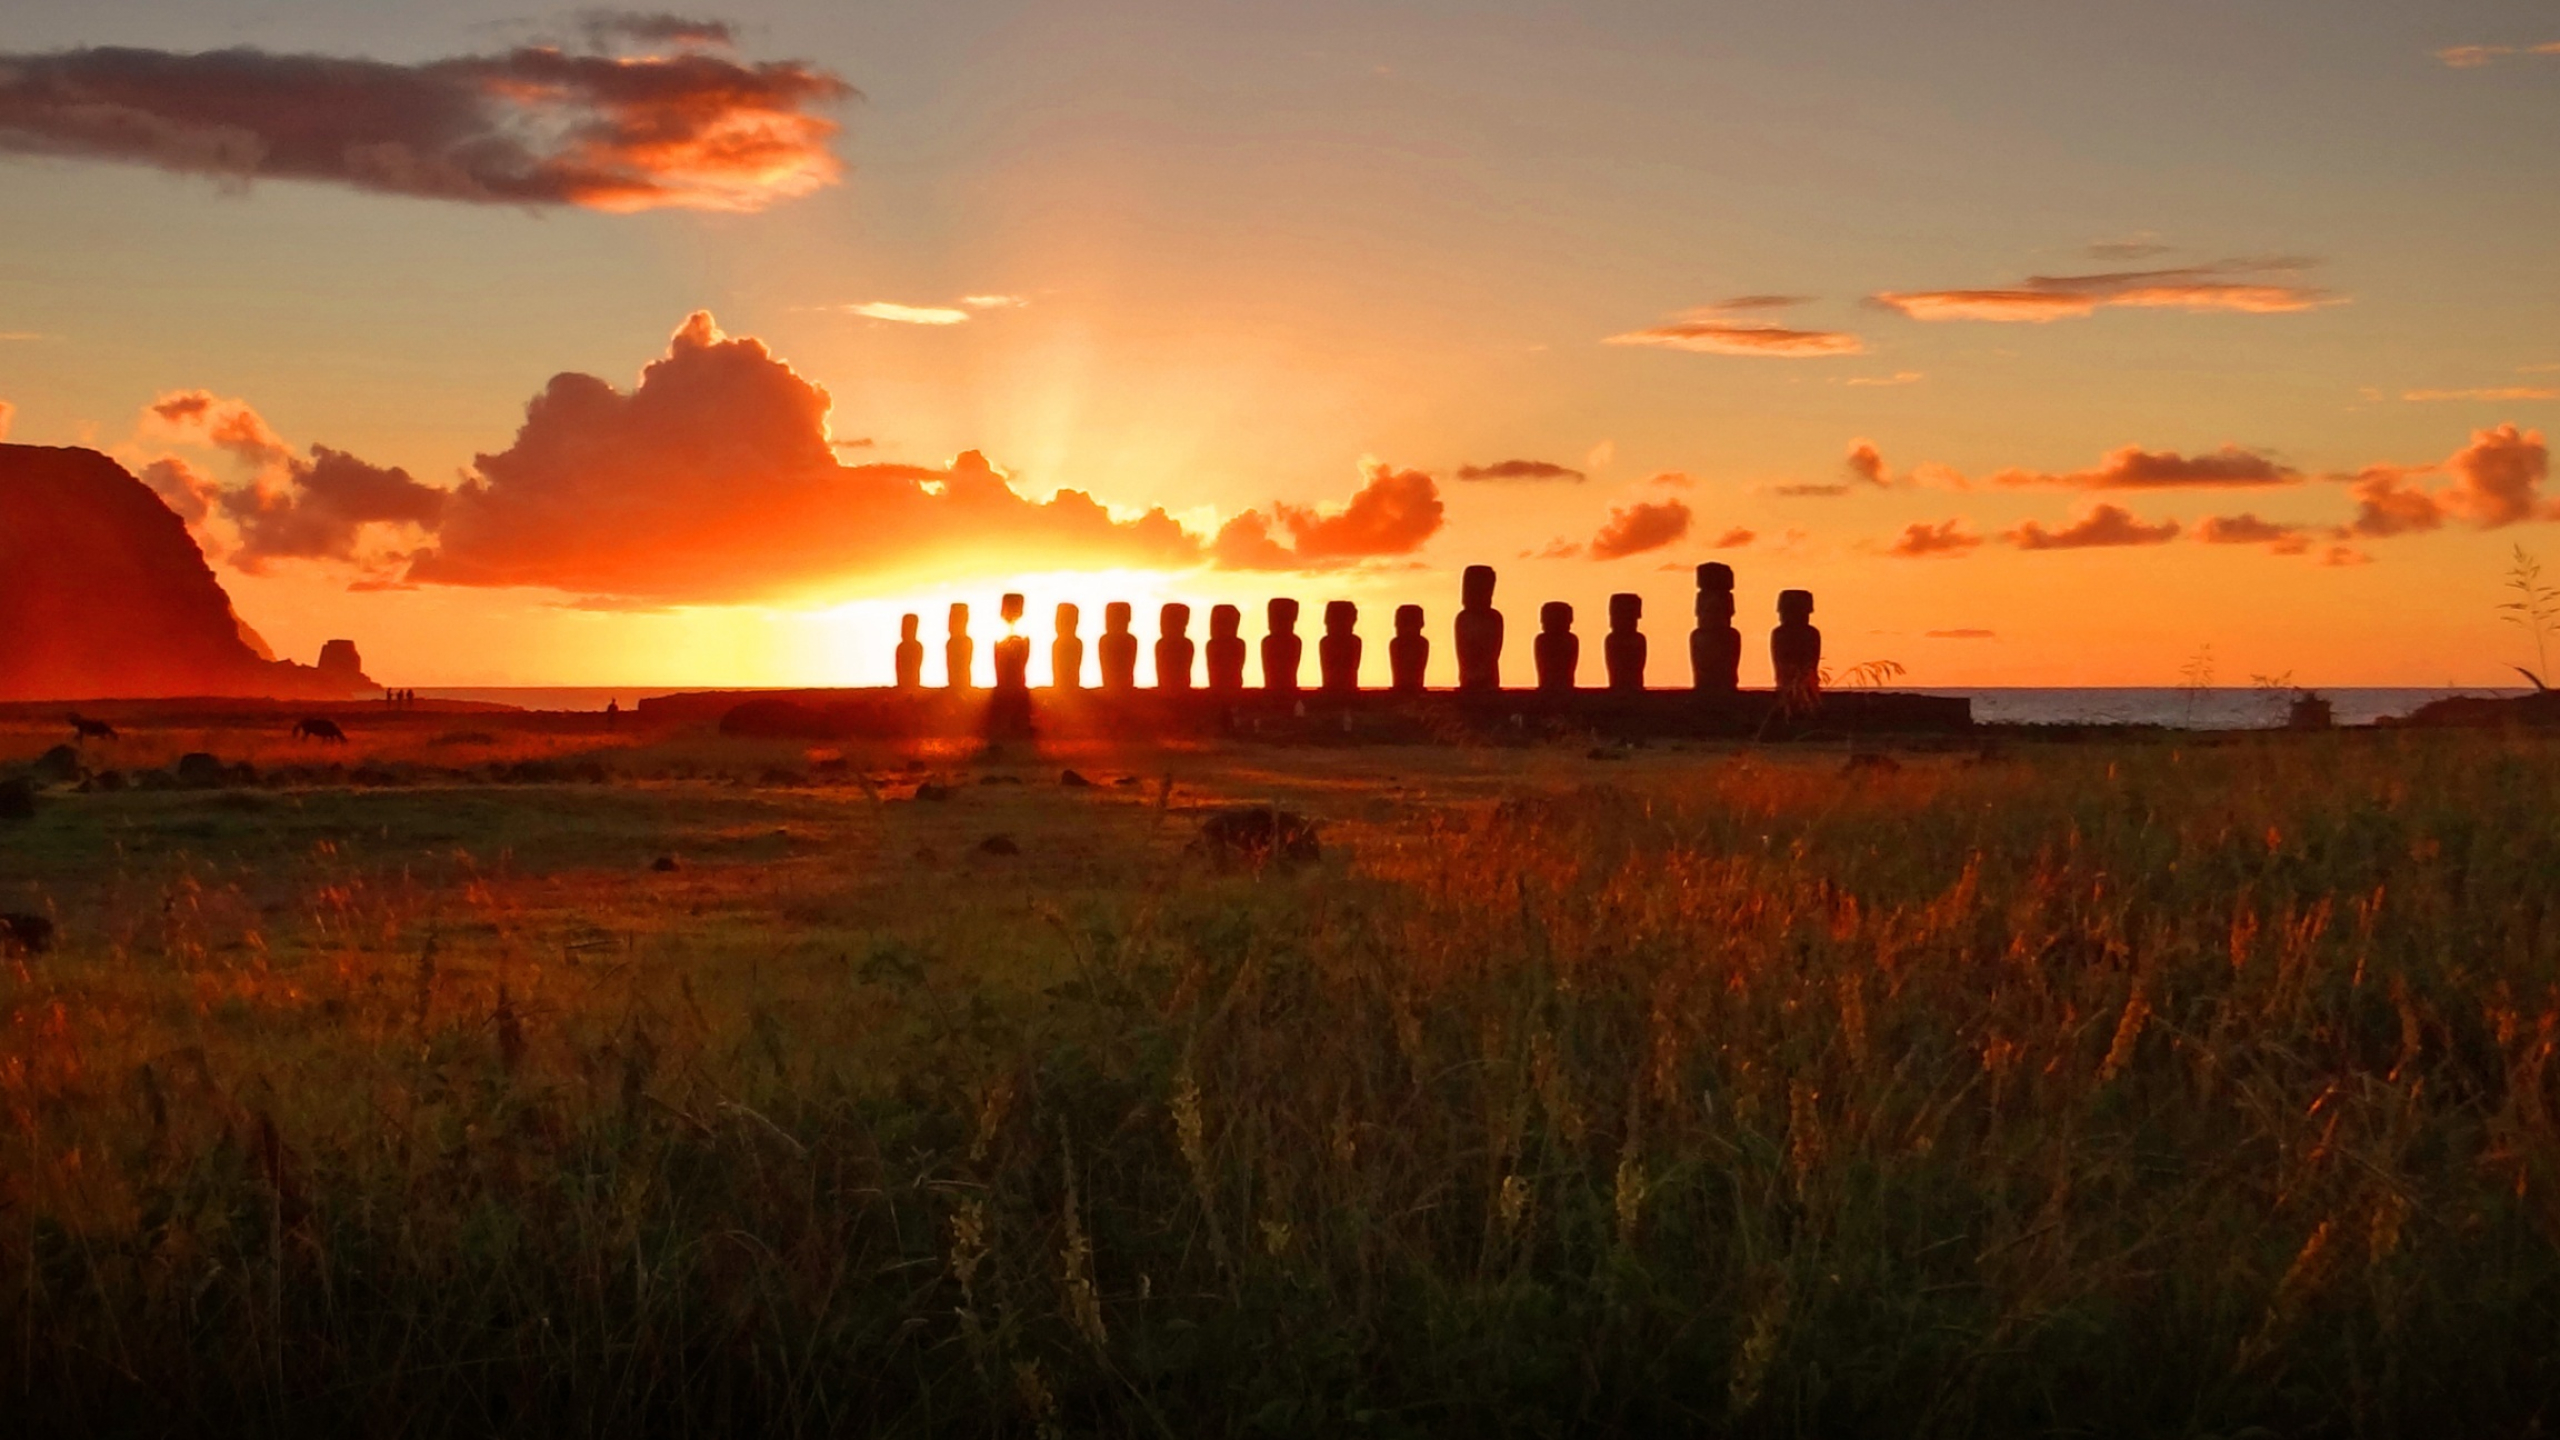 Chile: Easter Island, An island and special territory in the southeastern Pacific Ocean. 2560x1440 HD Wallpaper.